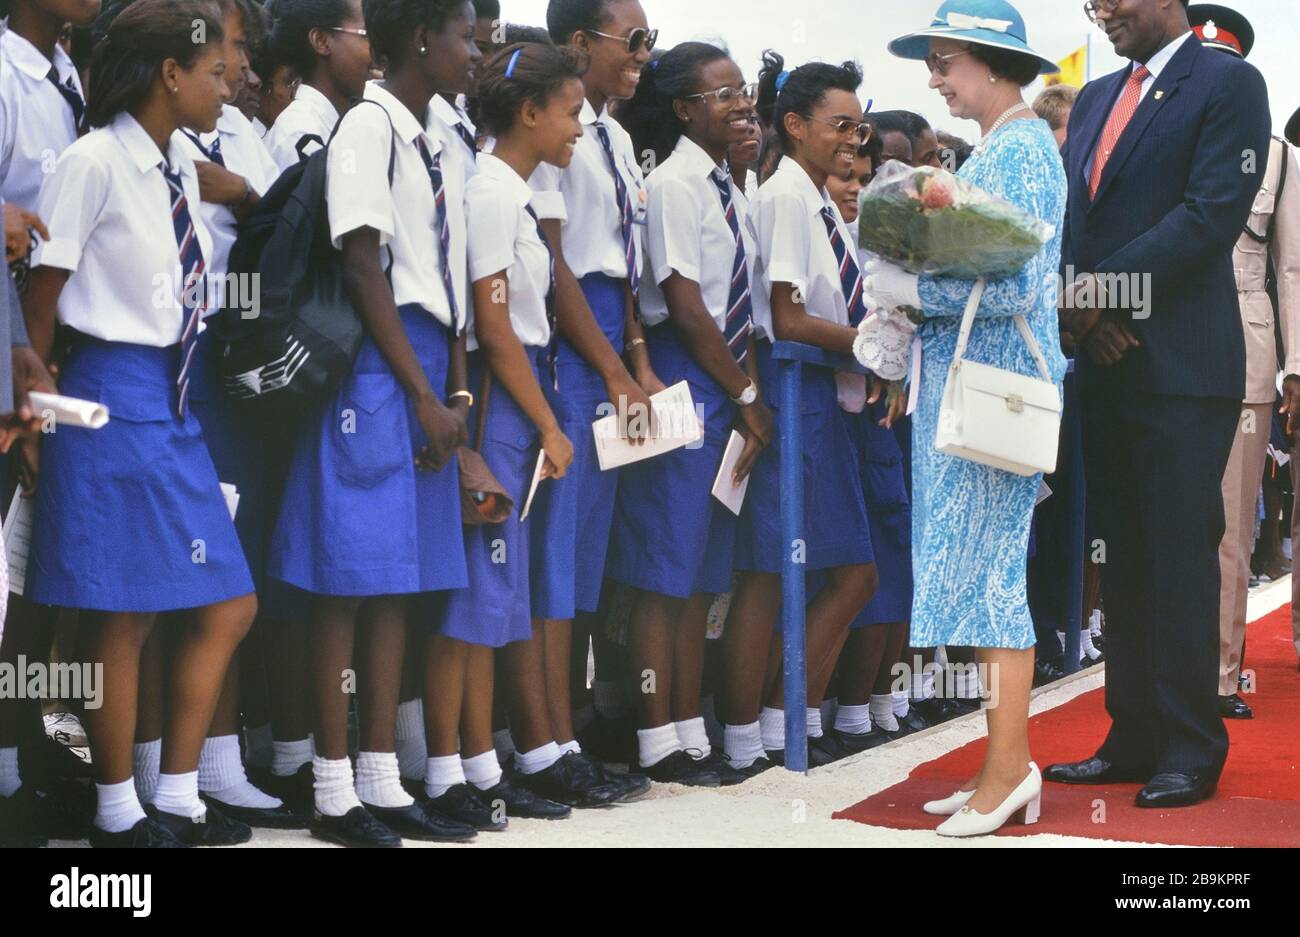 Queen Elizabeth II visit to Queen's College to officiate at a stone laying ceremony for the new school building. Barbados, Caribbean. 1989 Stock Photo